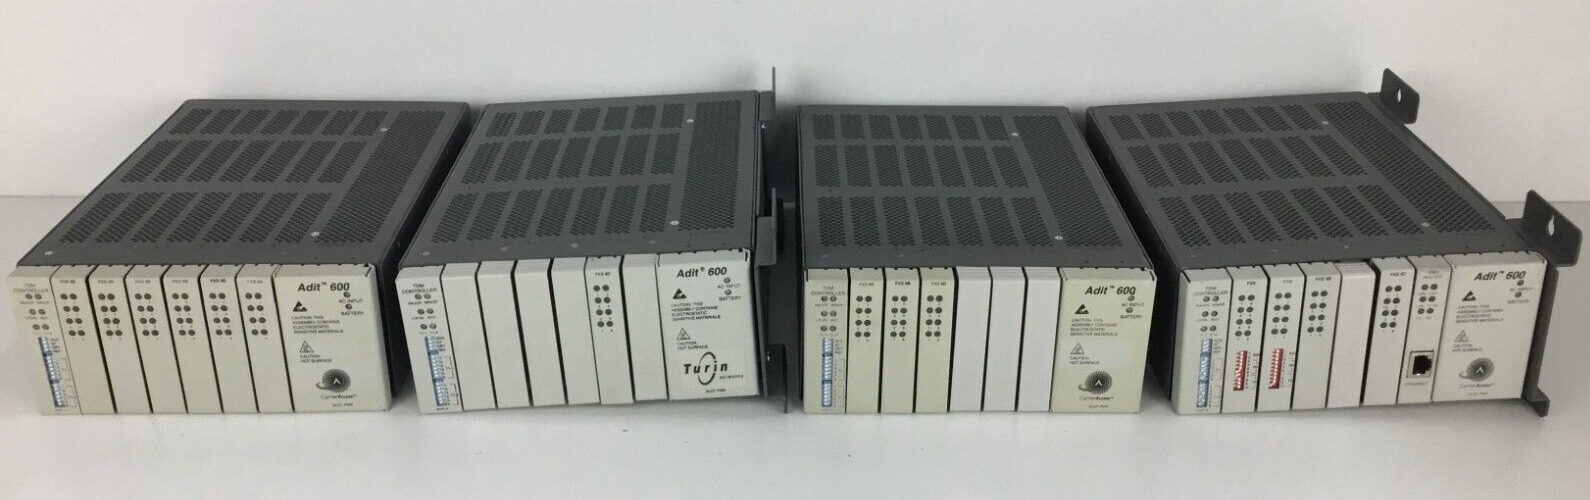 LOT OF 4 CAC ADIT 600 Multi-service Delivery Terminal